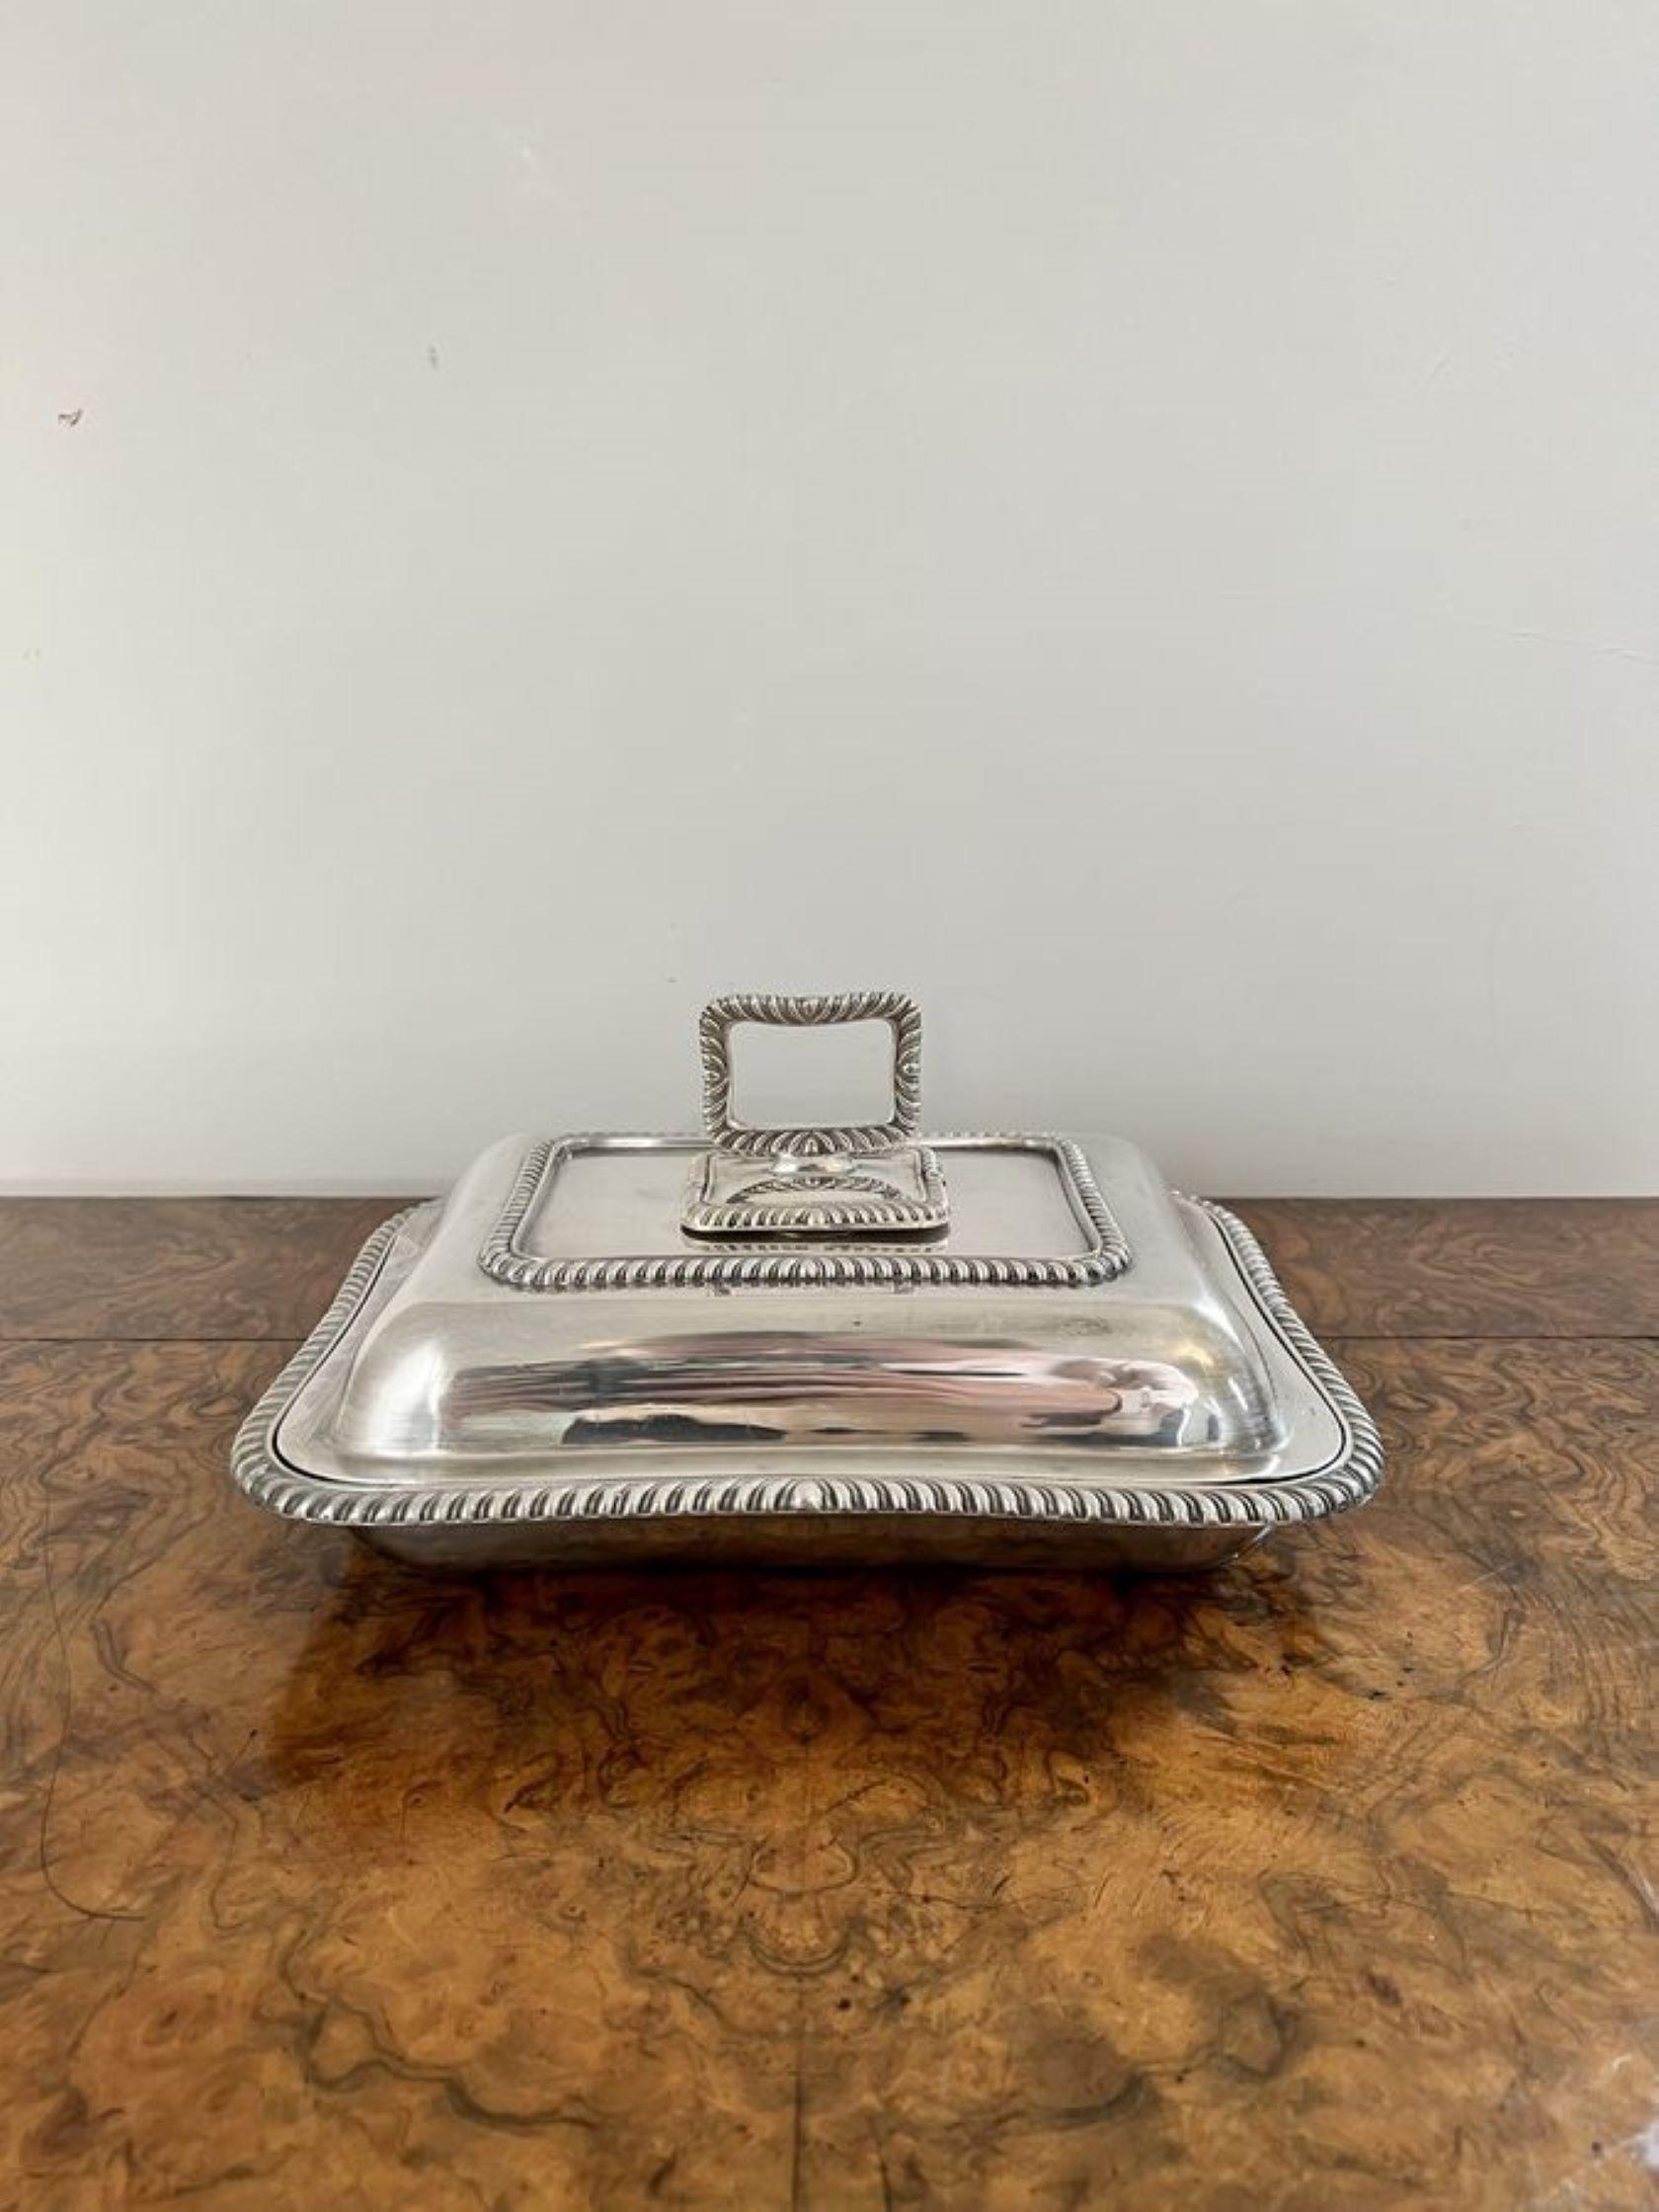 Silver Plate Stunning antique Edwardian quality silver plated rectangle entrée dish For Sale